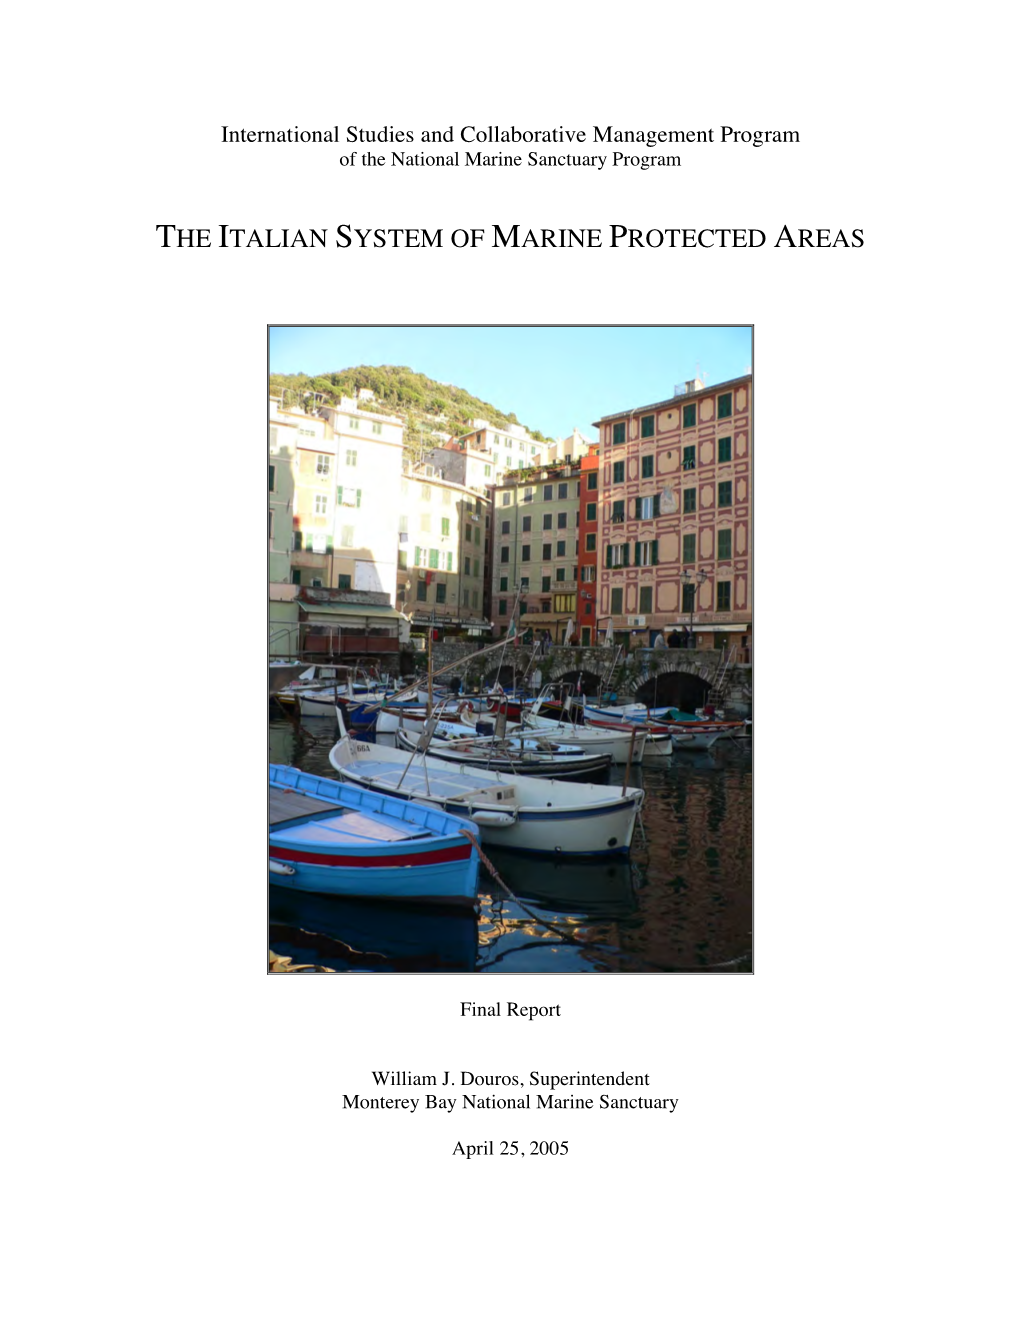 The Italian System of Marine Protected Areas Final Report